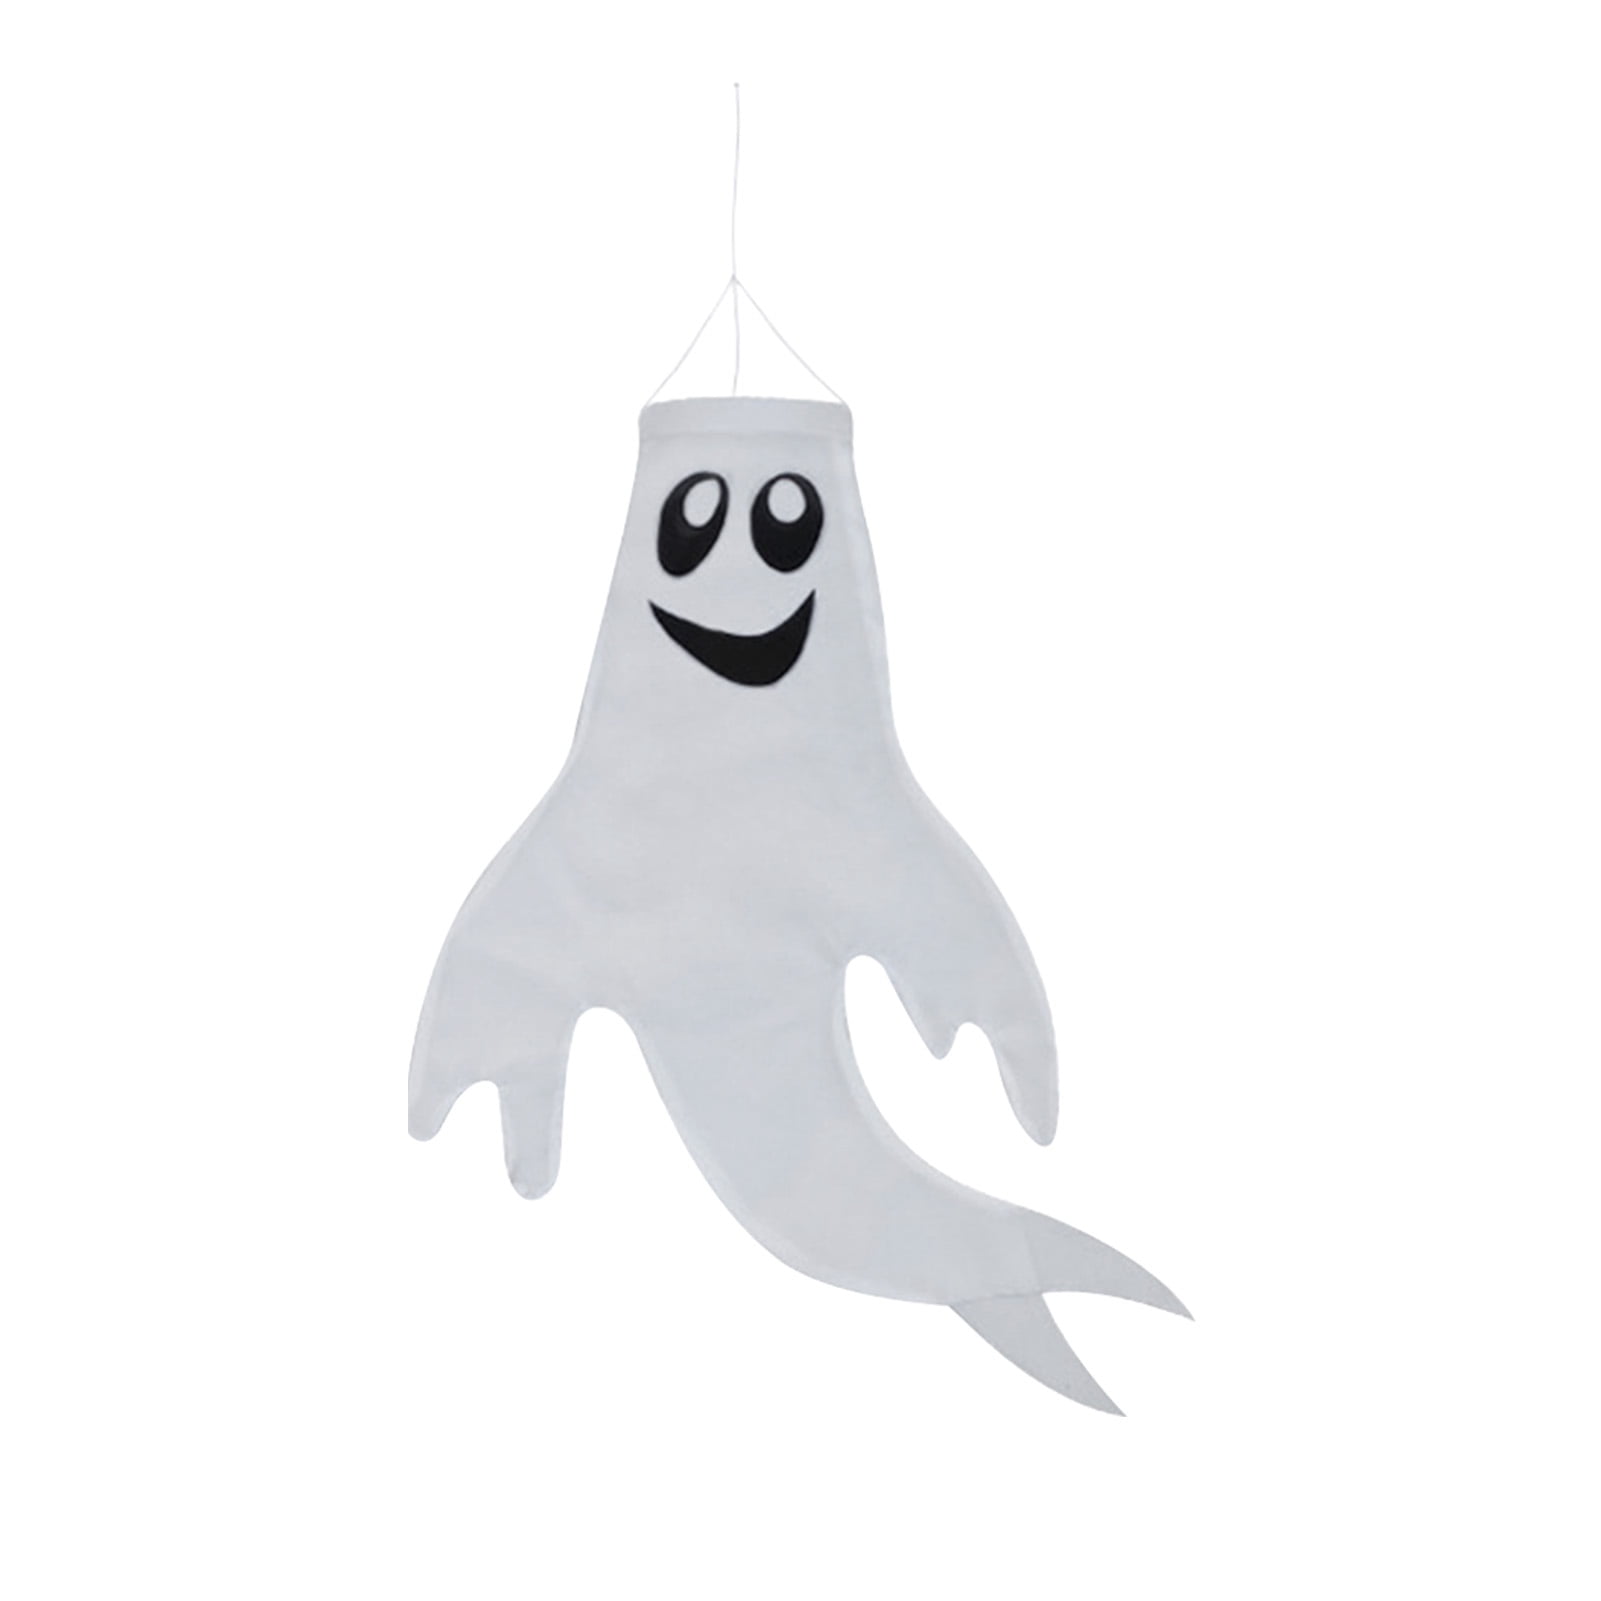 STOBOK Halloween Wind Socks 74.2x140cm 2Pcs Halloween Ghost Hanging Decoration for Home Yard Outdoor Decor with 2Pcs String Lights